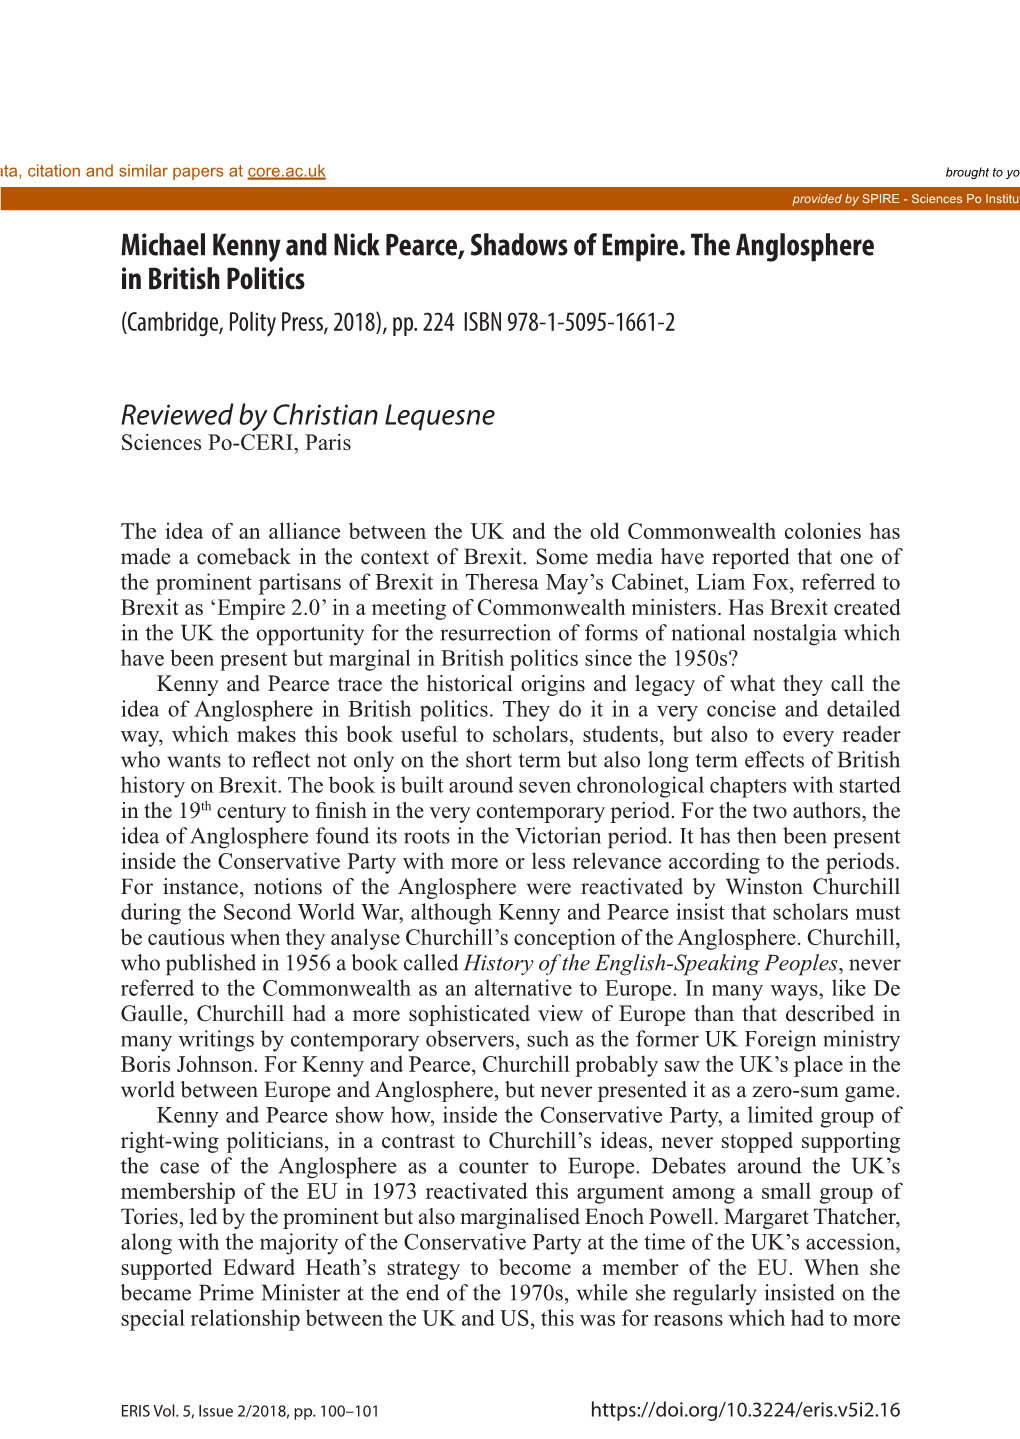 Michael Kenny and Nick Pearce, Shadows of Empire. the Anglosphere in British Politics (Cambridge, Polity Press, 2018), Pp